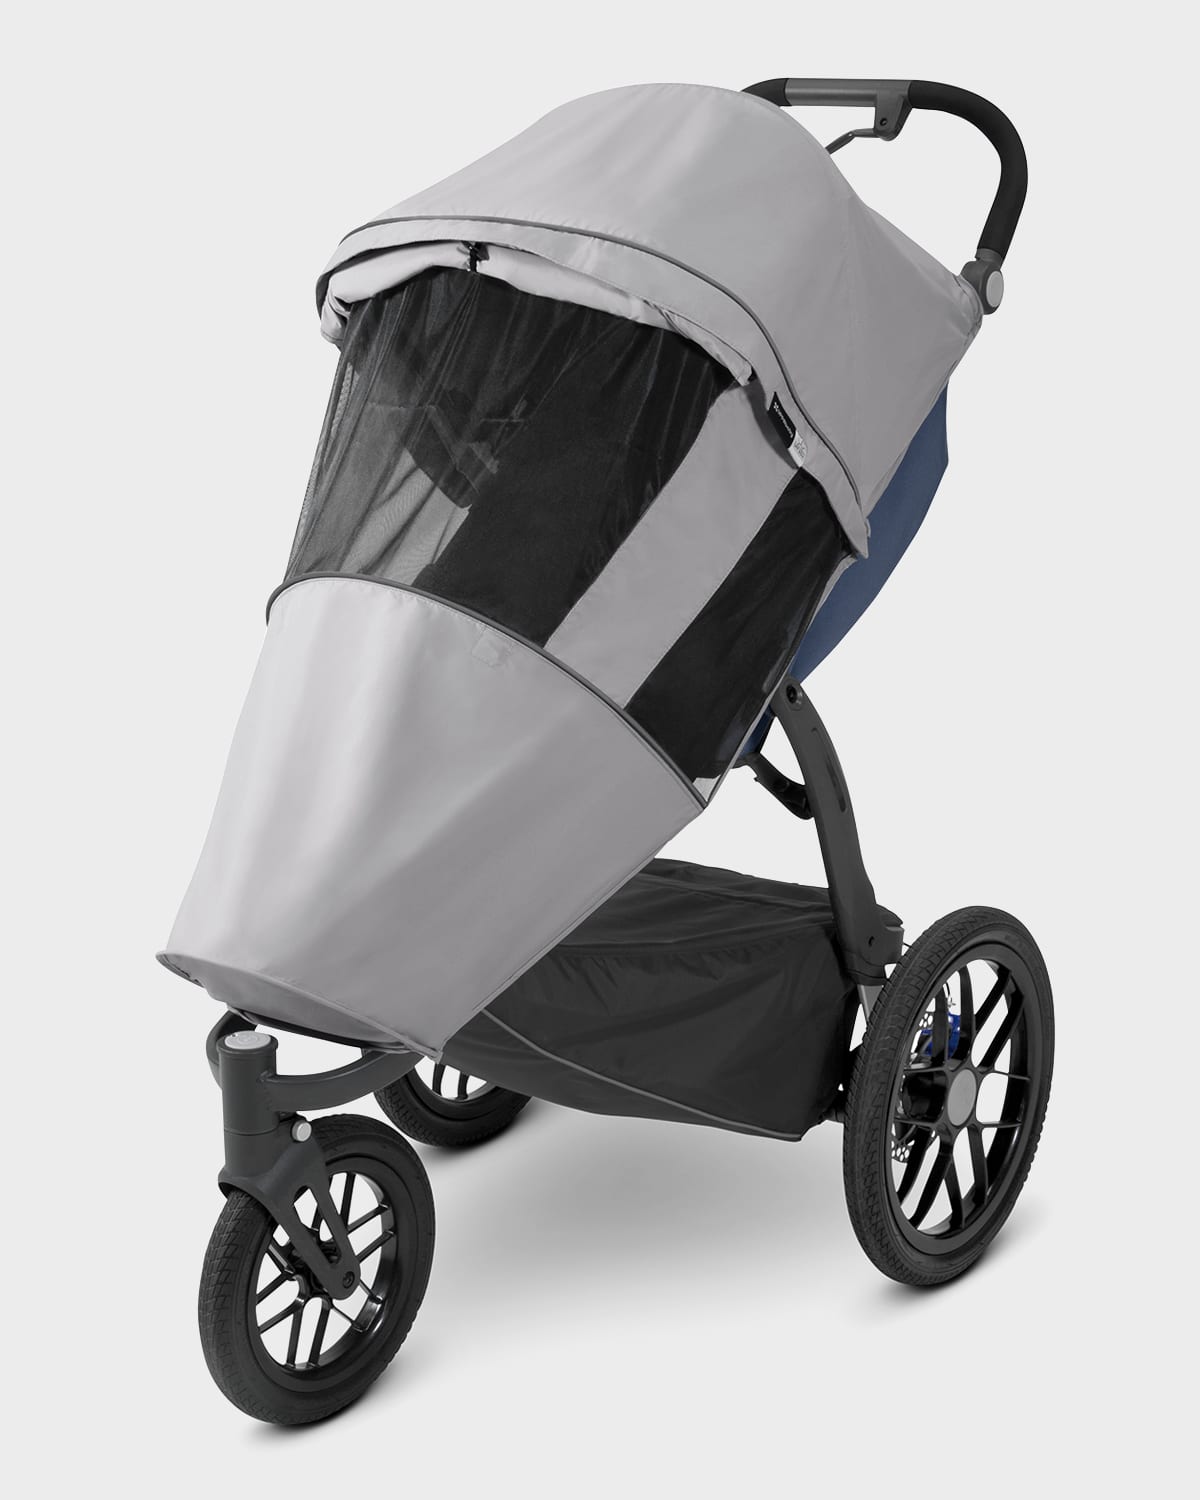 UPPABABY SUN AND BUG SHIELD FOR RIDGE STROLLER